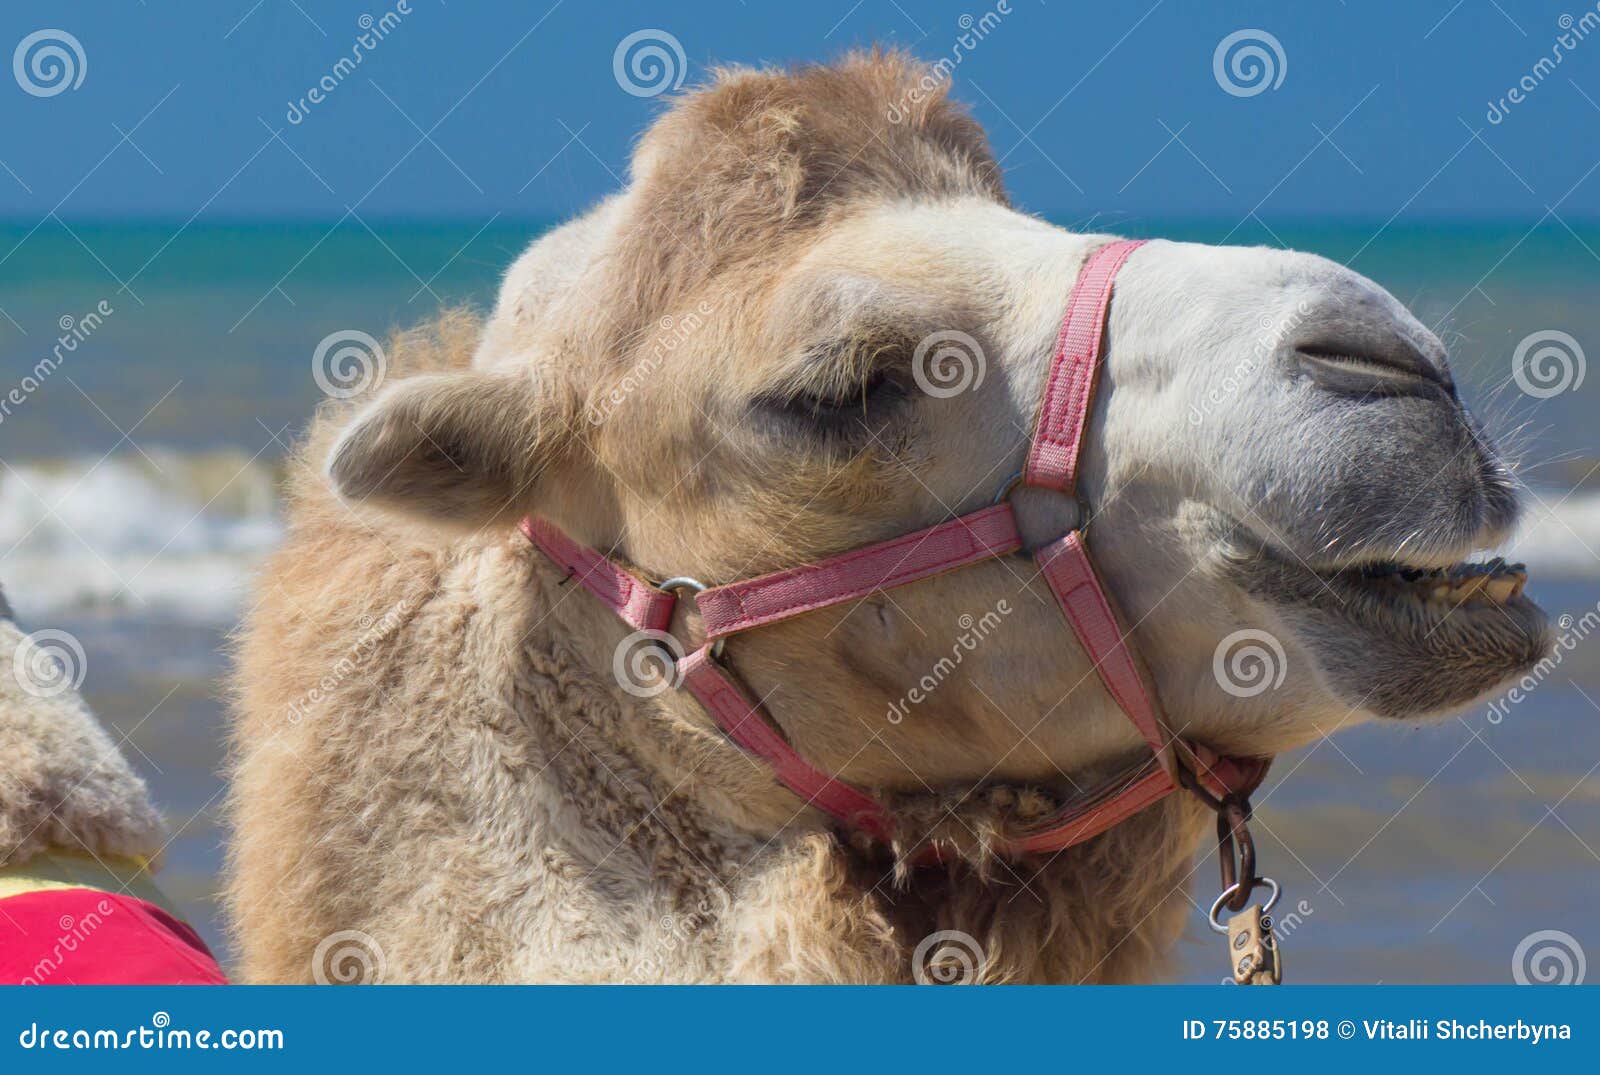 Bactrian camel walks on the beach with blue sky. Close-up